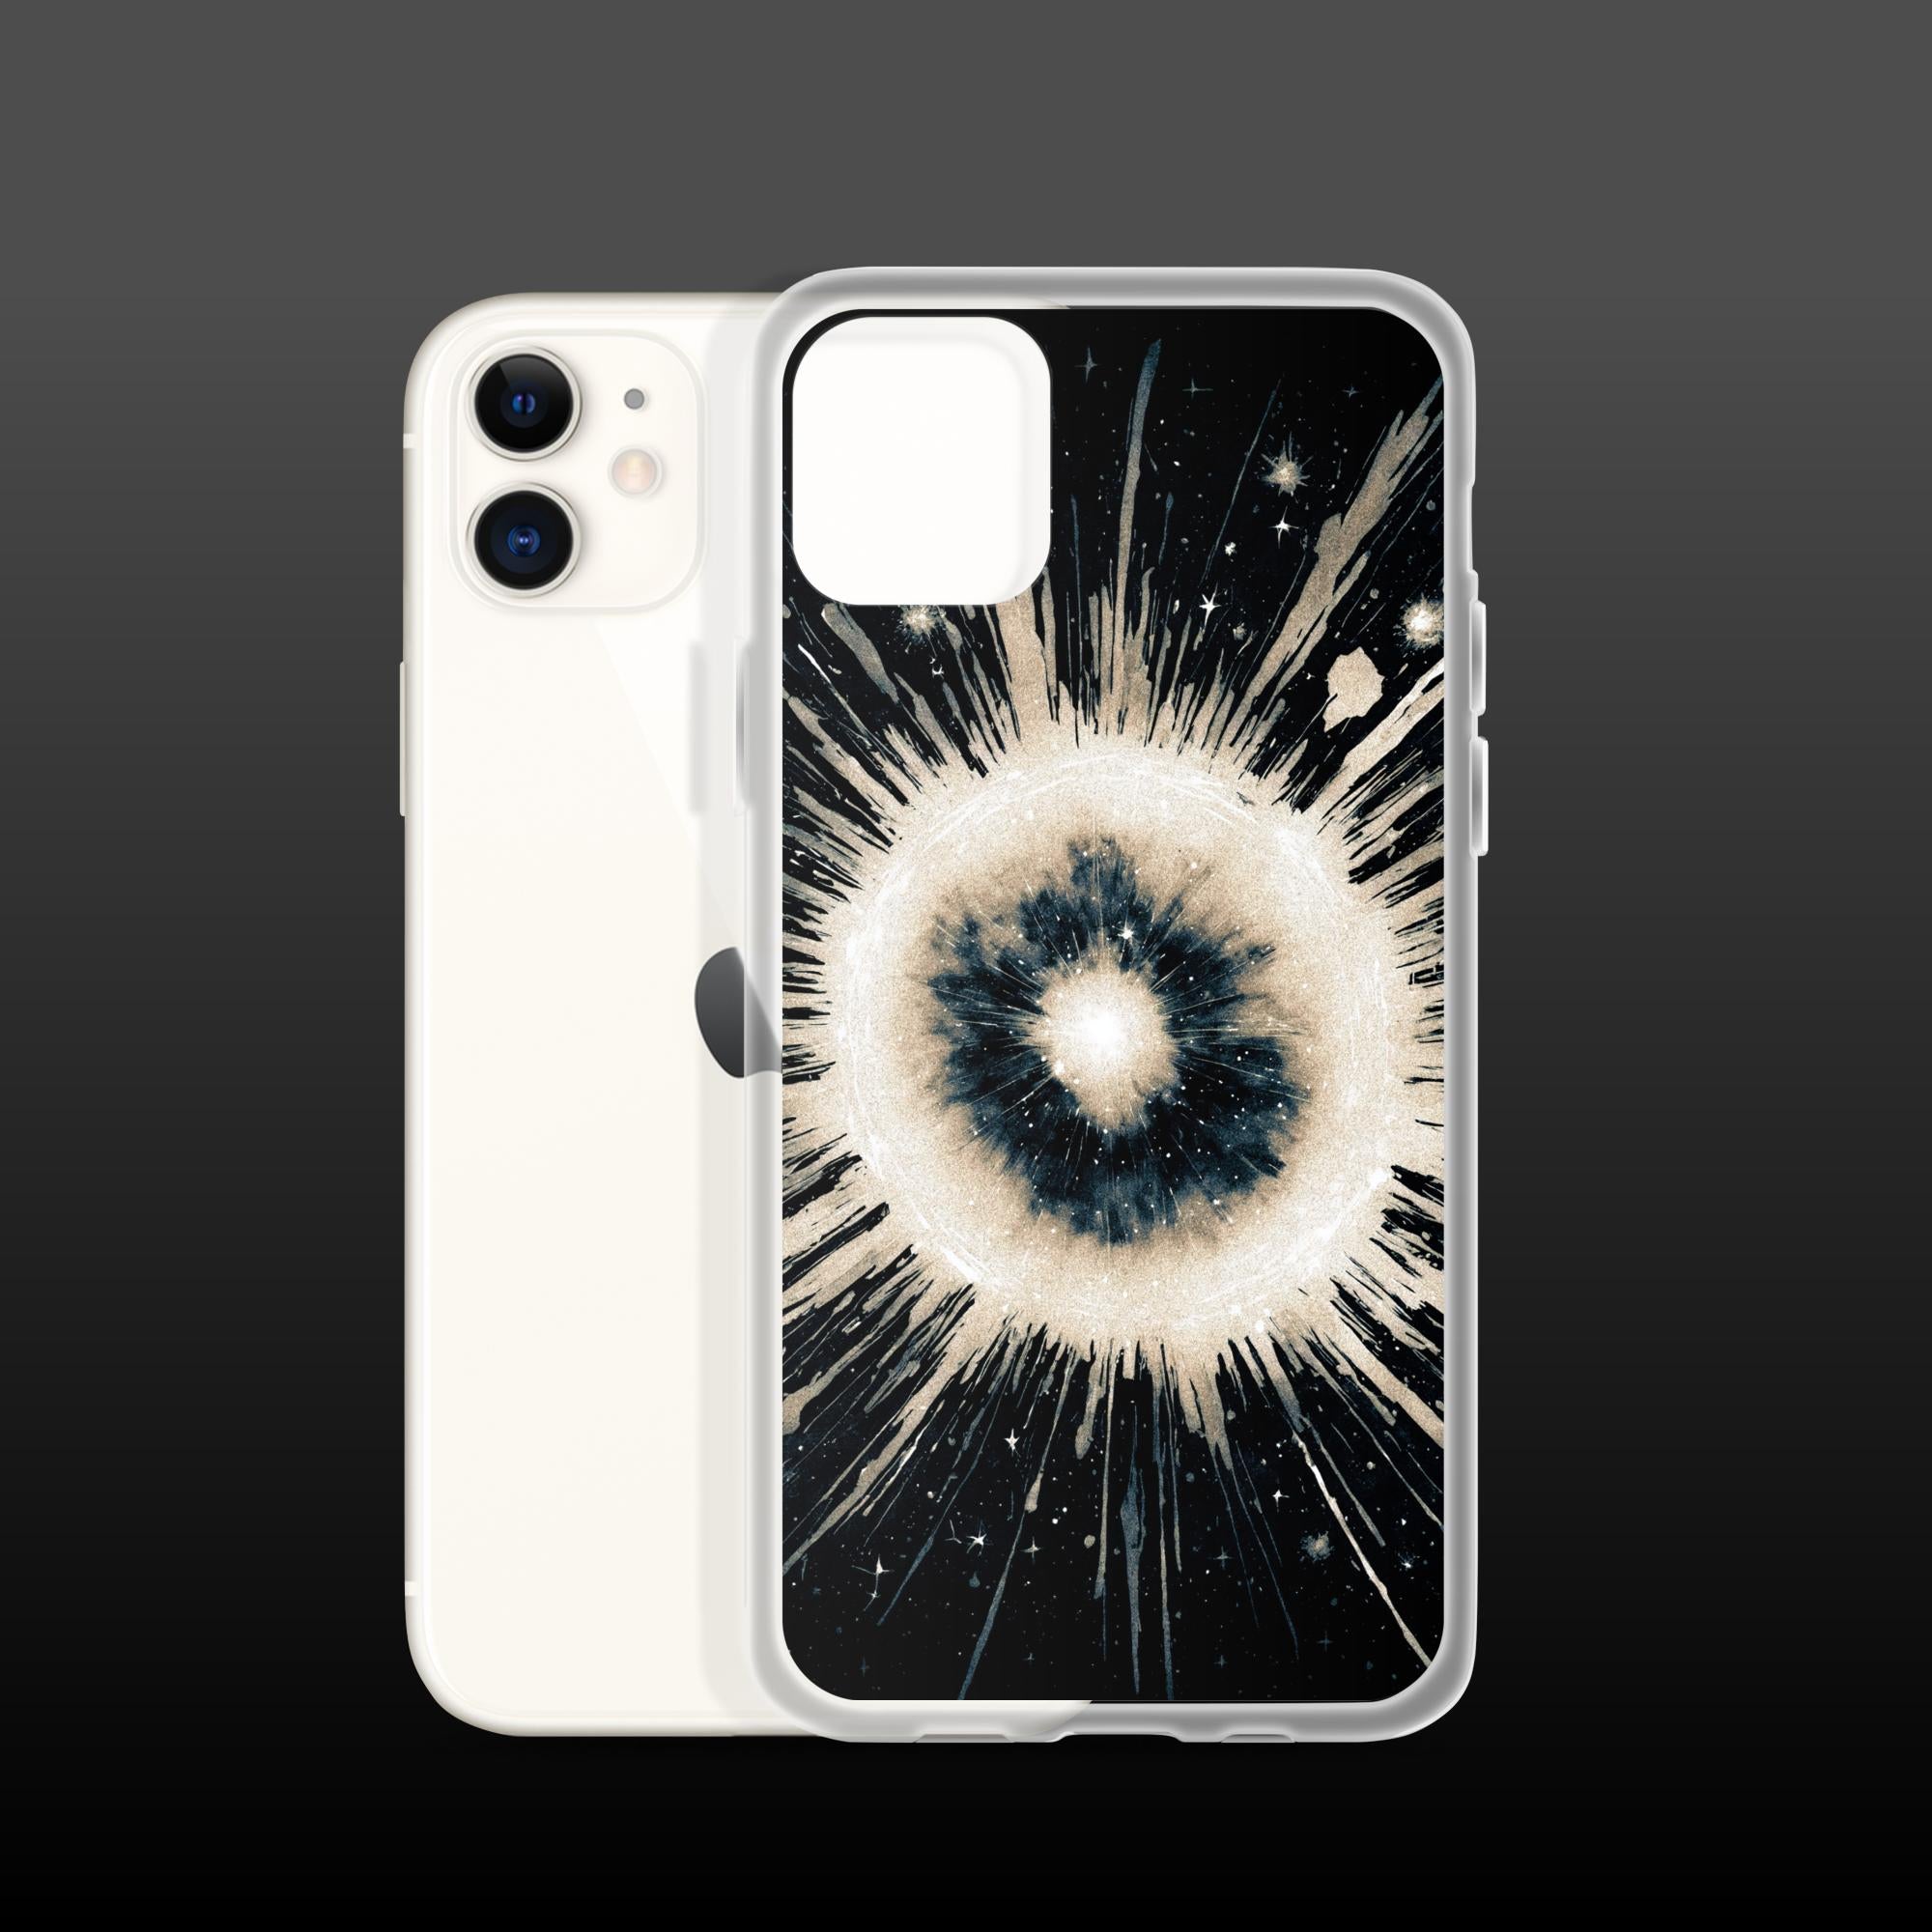 "Grayscale nova" clear iphone case - Clear iphone case - Ever colorful